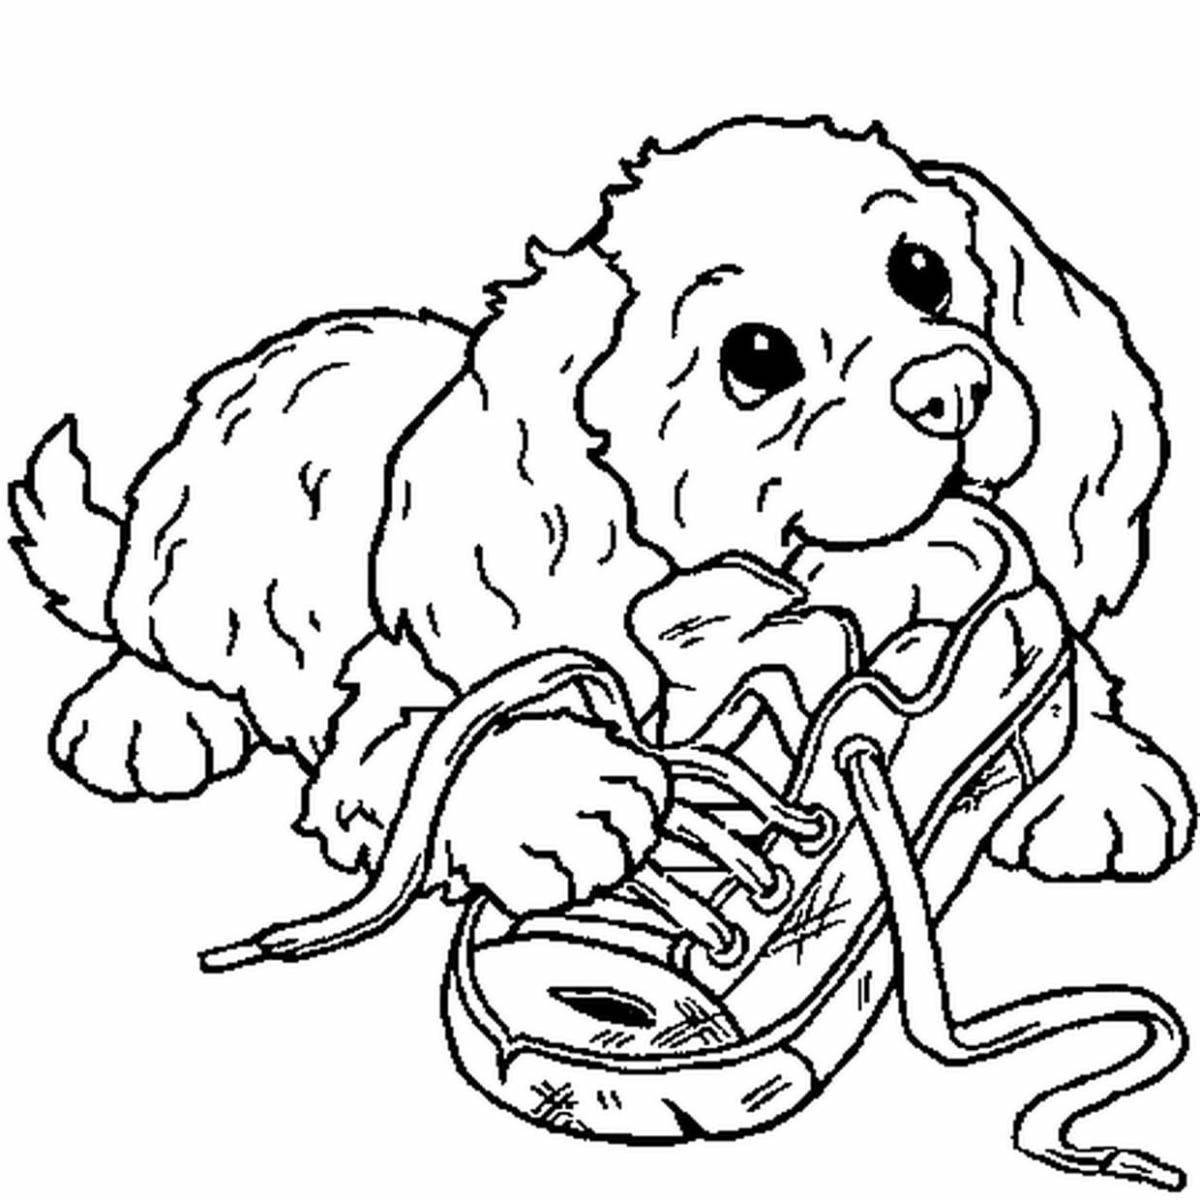 Fancy coloring my puppy mihalkov for kids